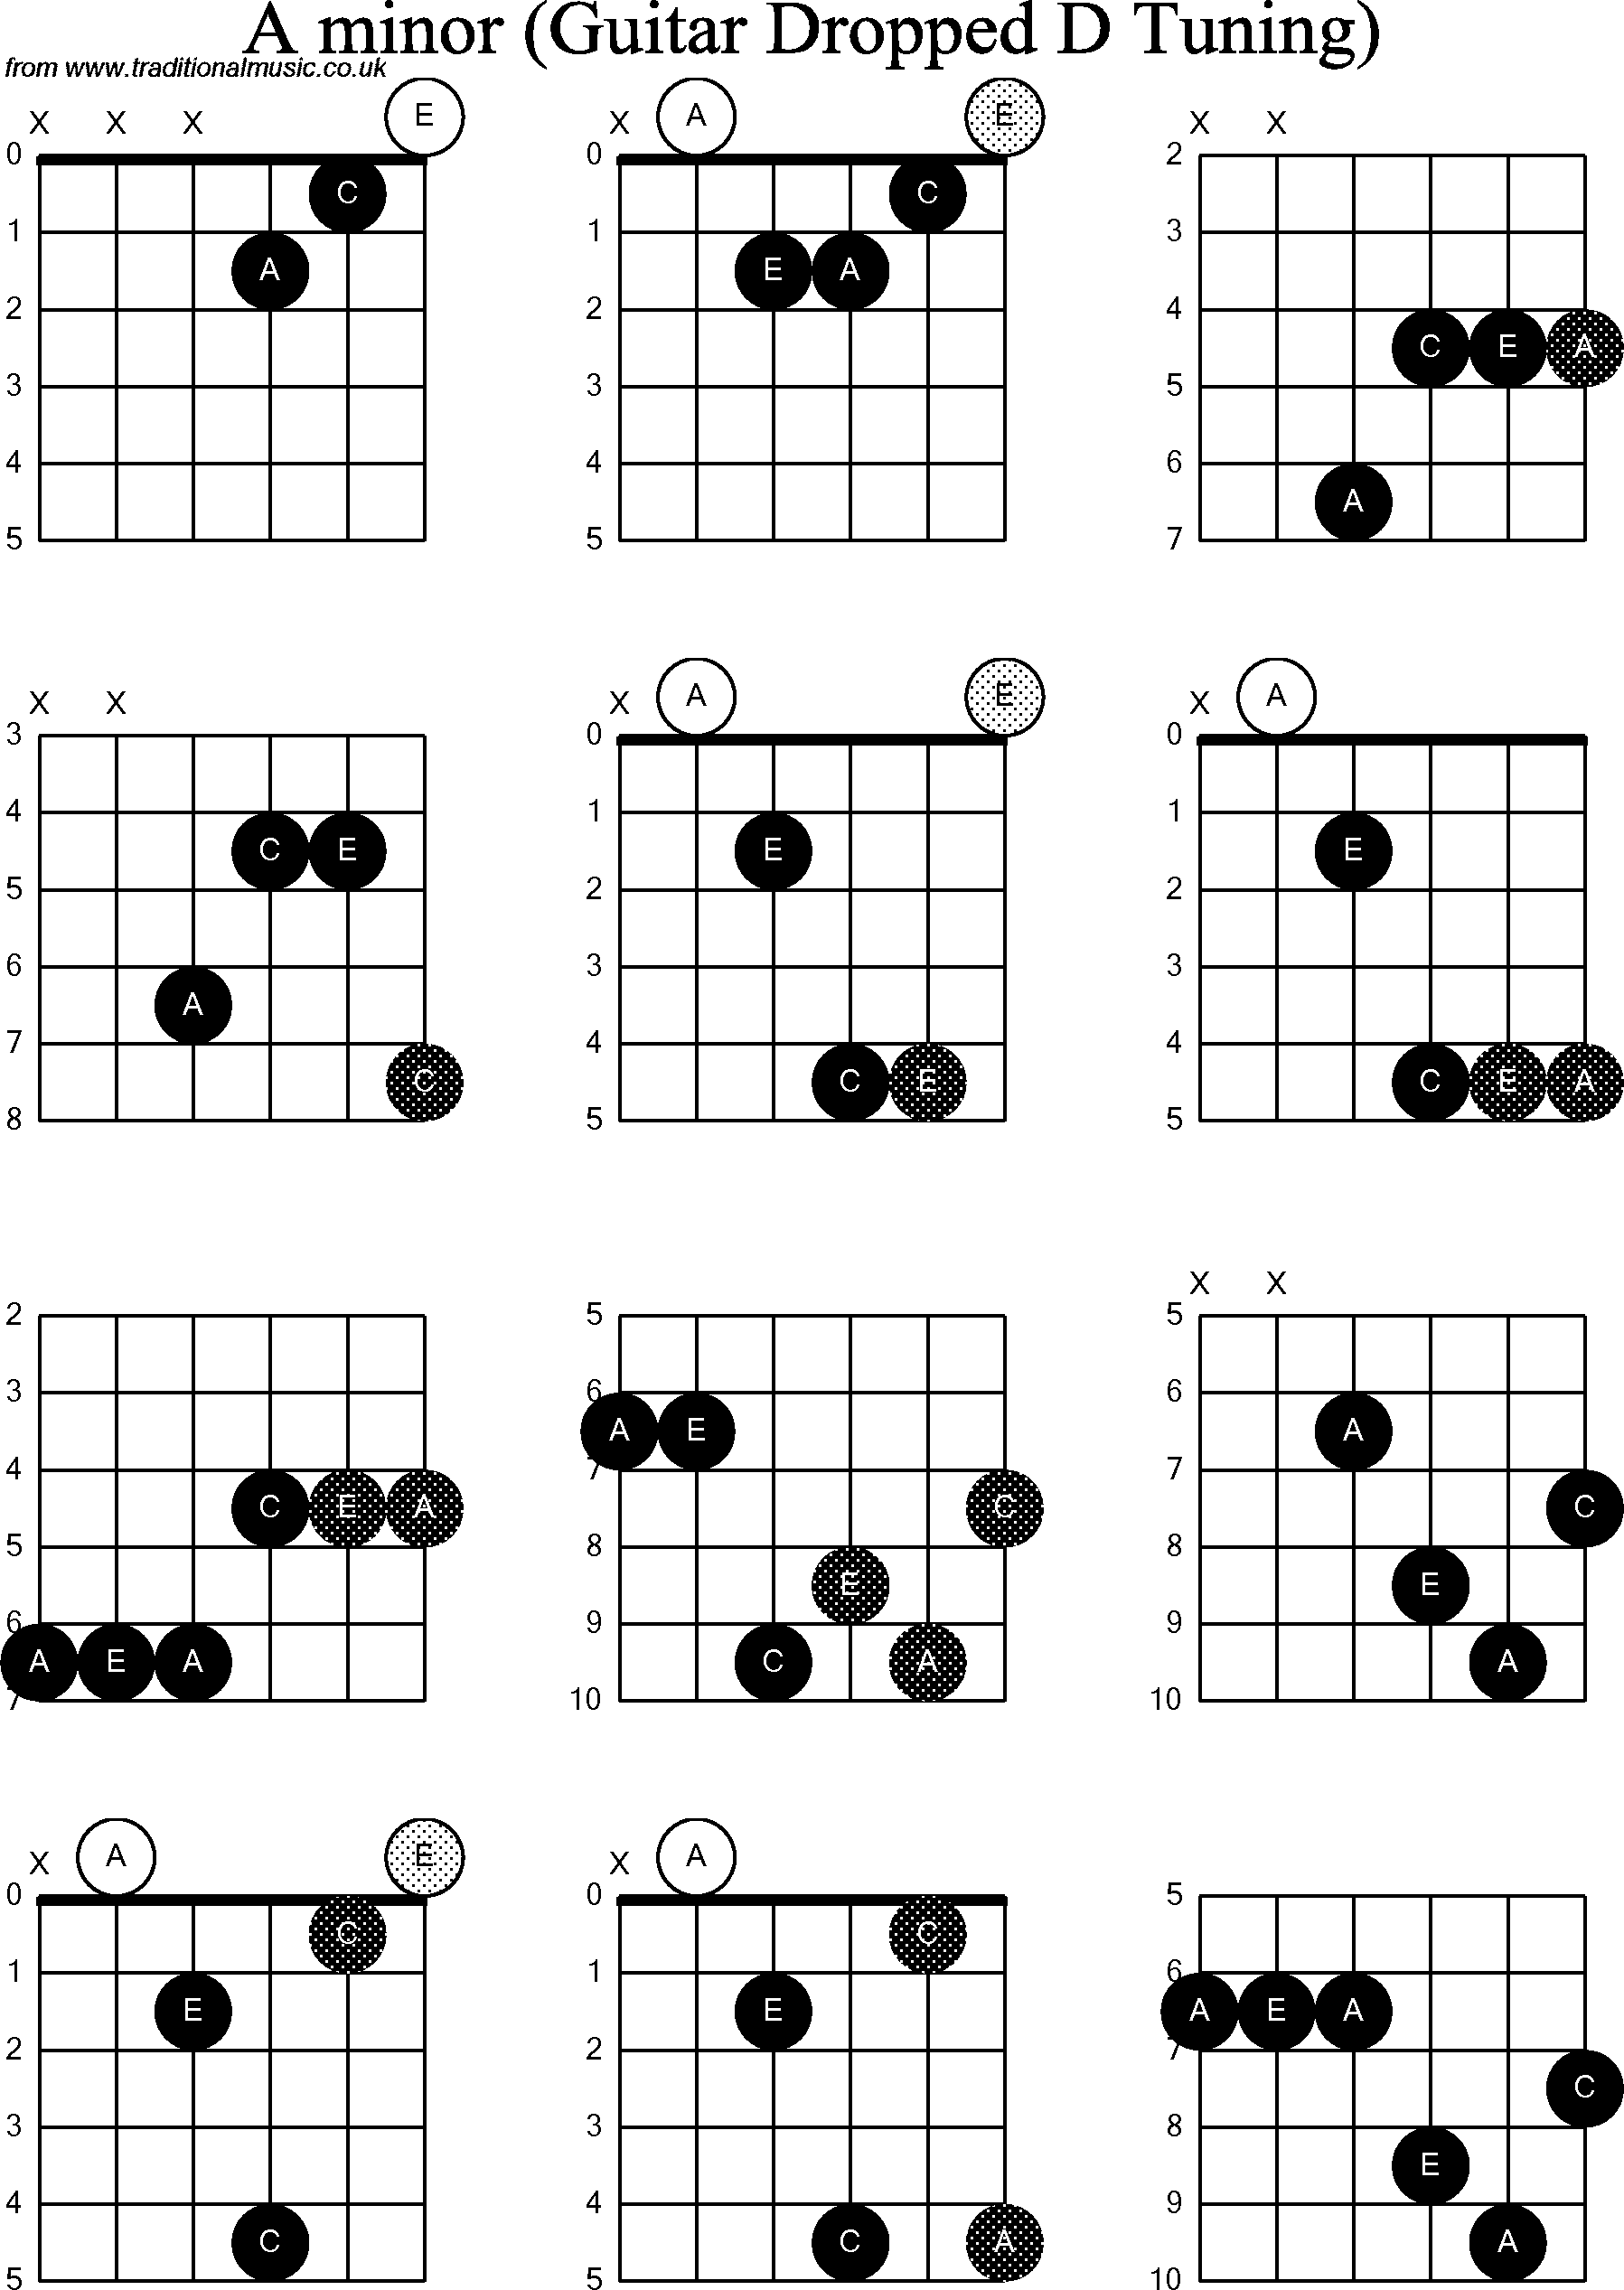 Chord diagrams for dropped D Guitar(DADGBE), A Minor